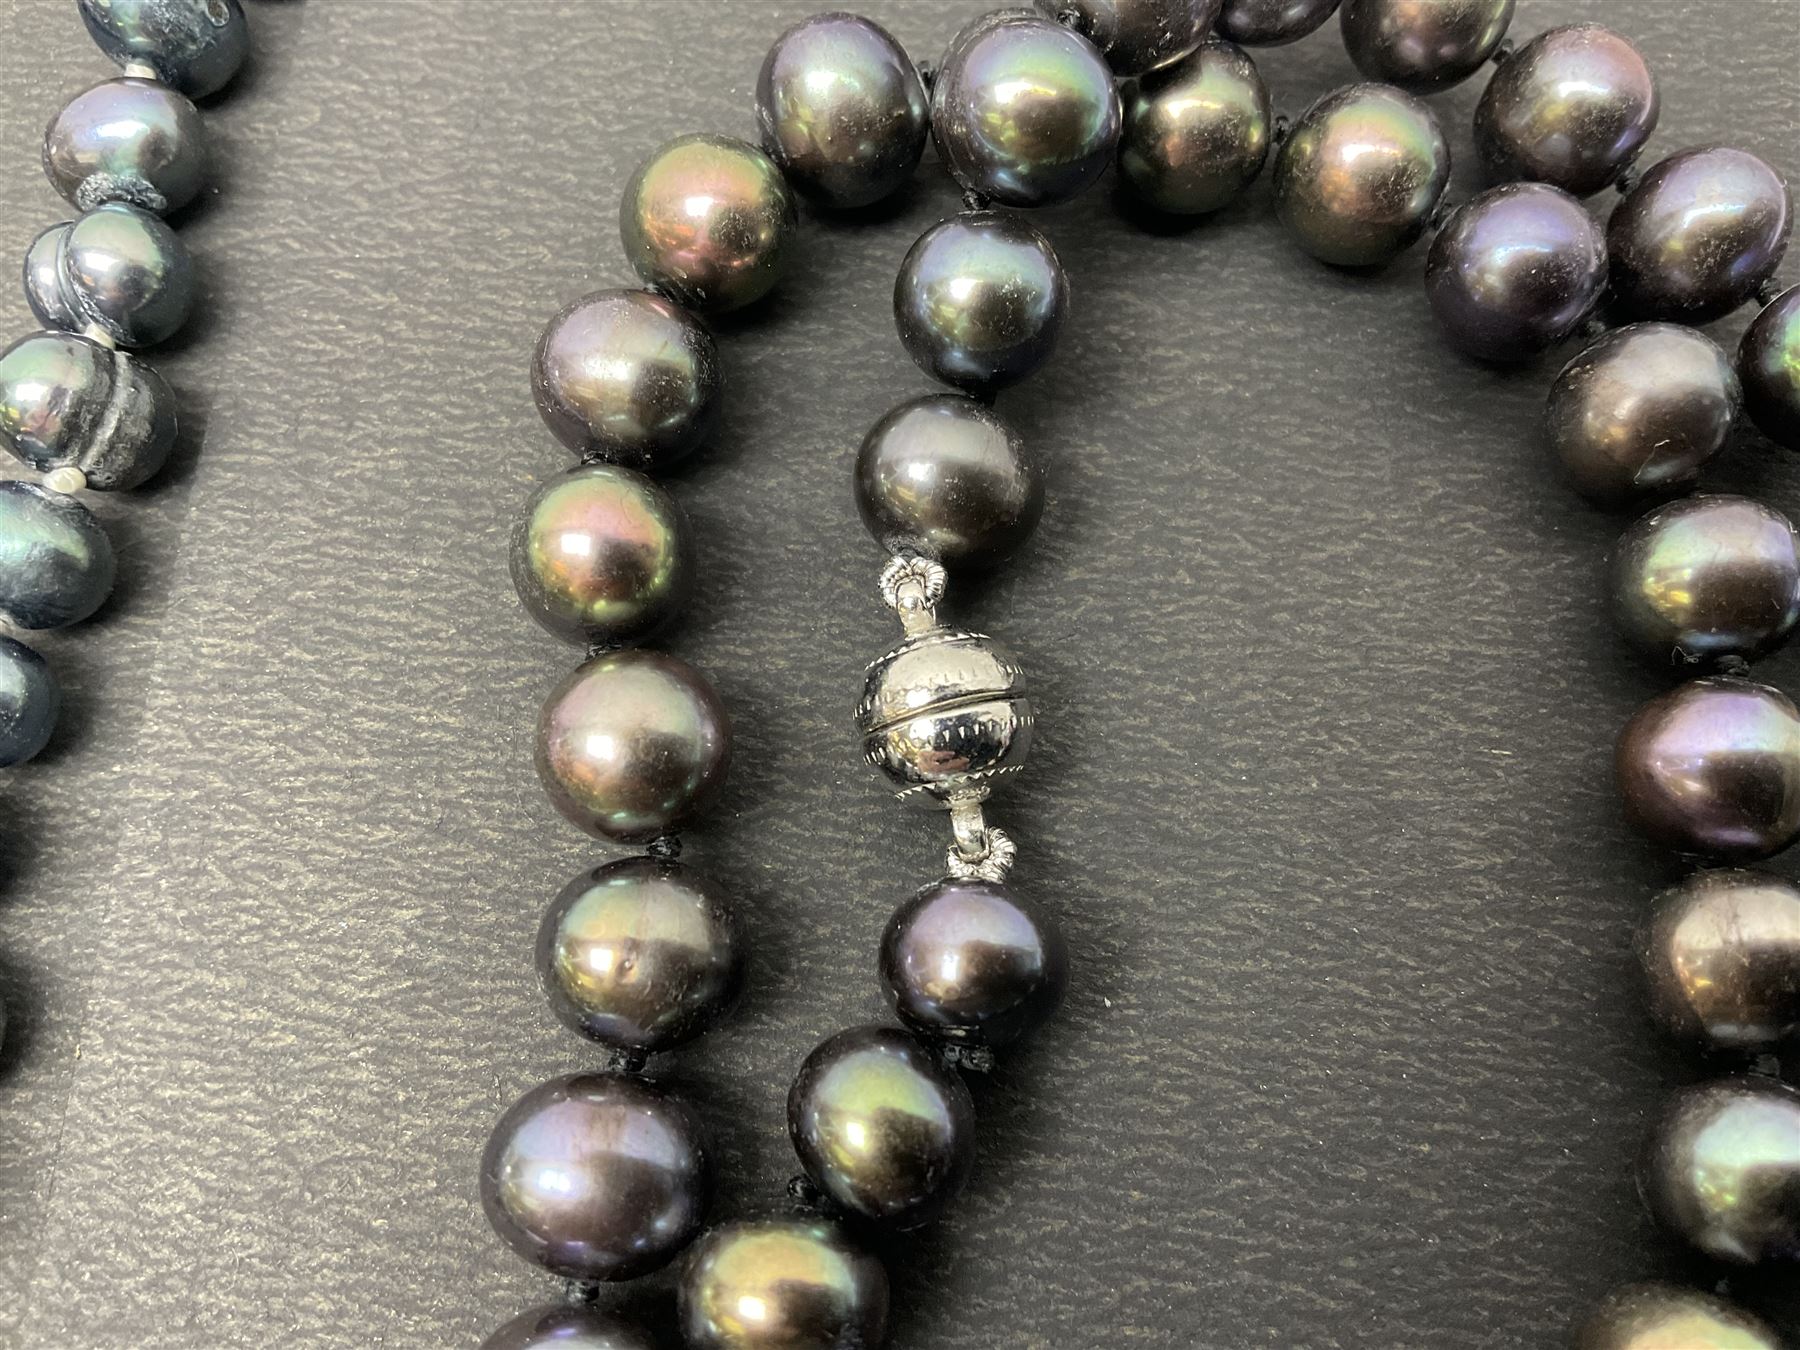 Four fresh water pearl necklaces - Image 13 of 77